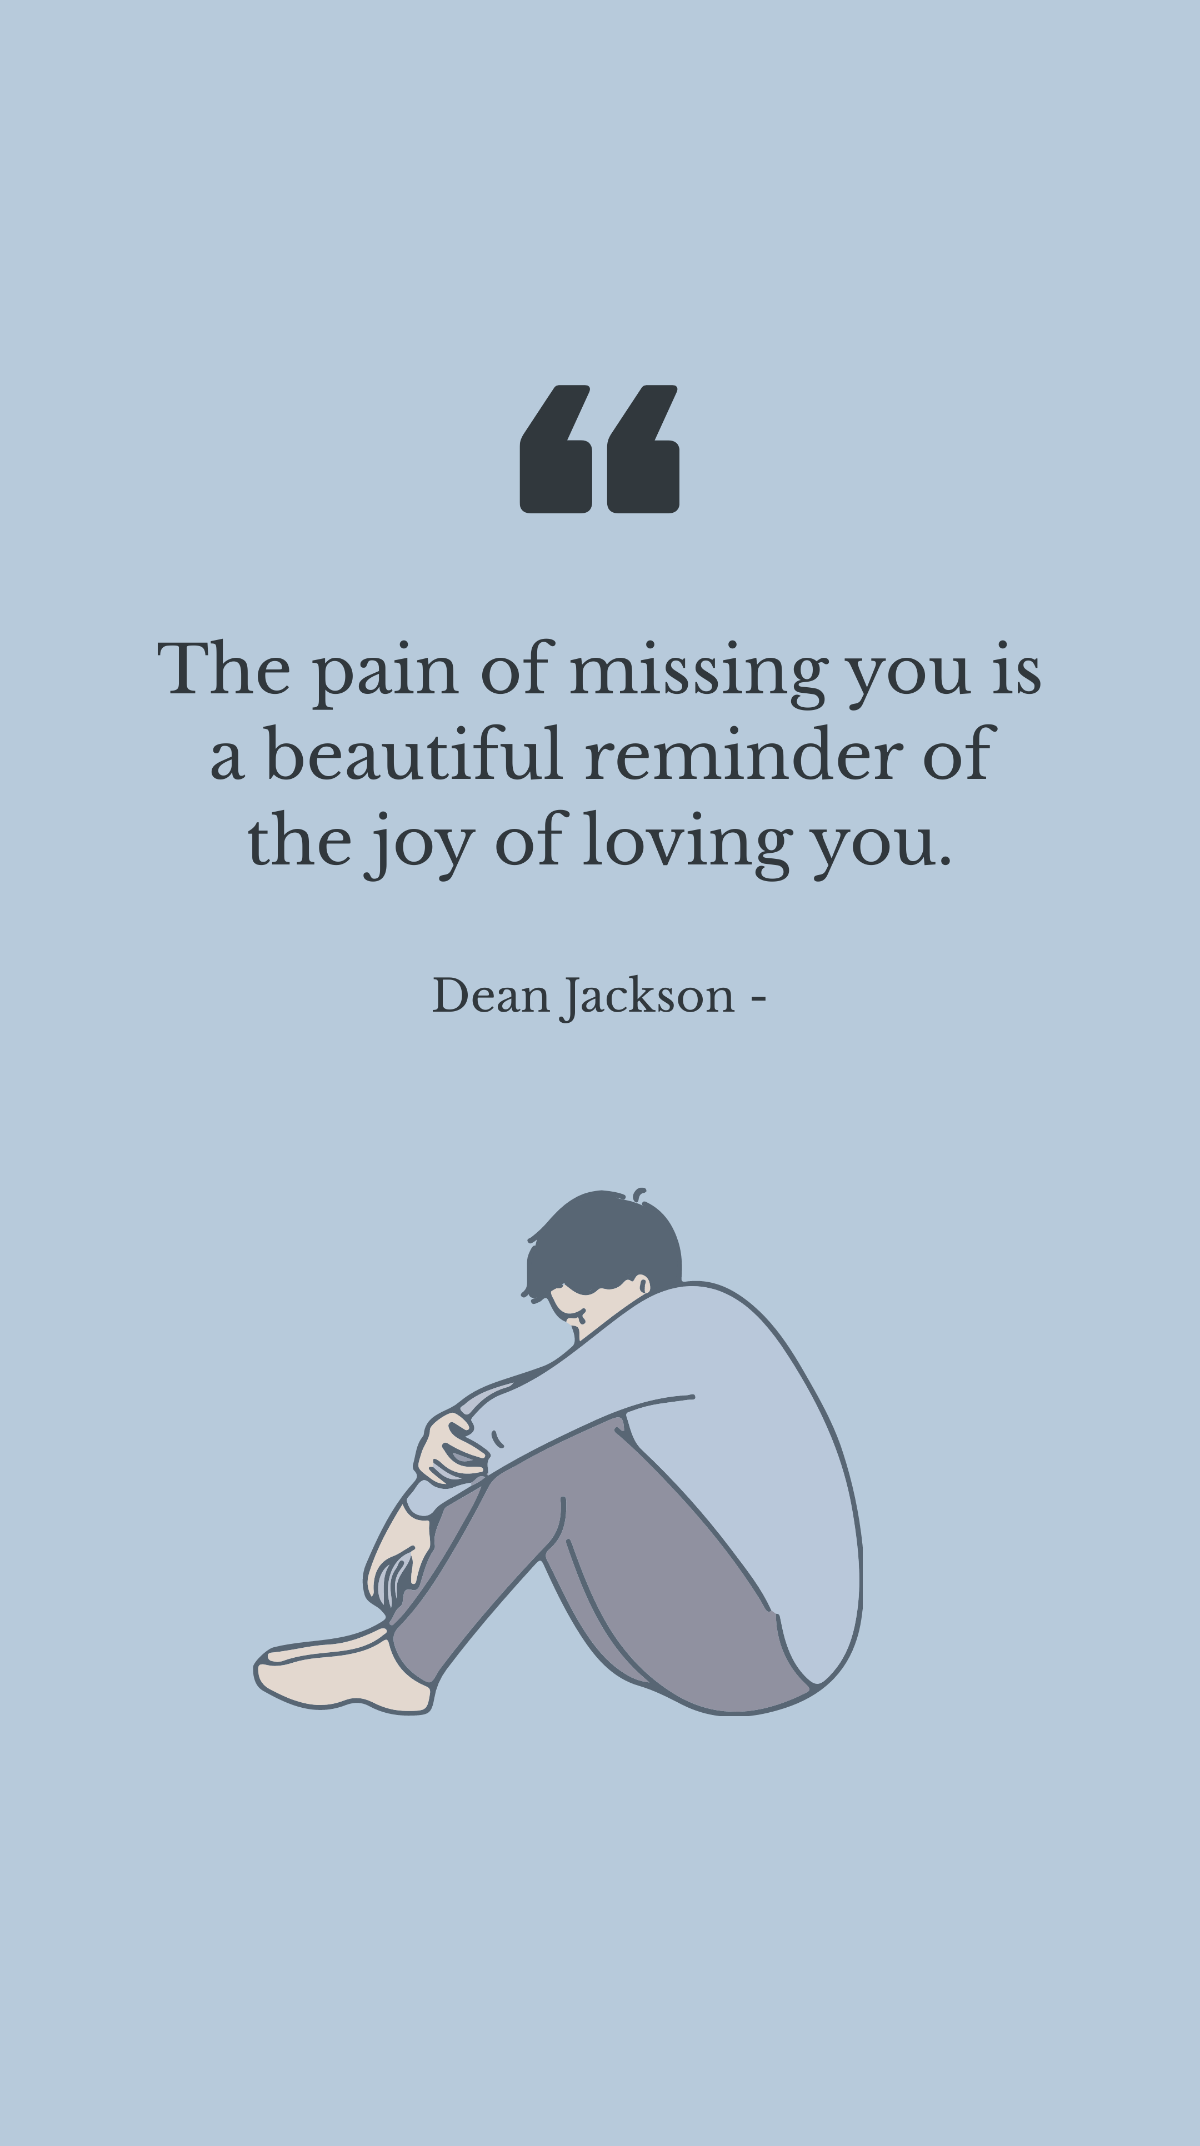 Dean Jackson - The pain of missing you is a beautiful reminder of the joy of loving you.